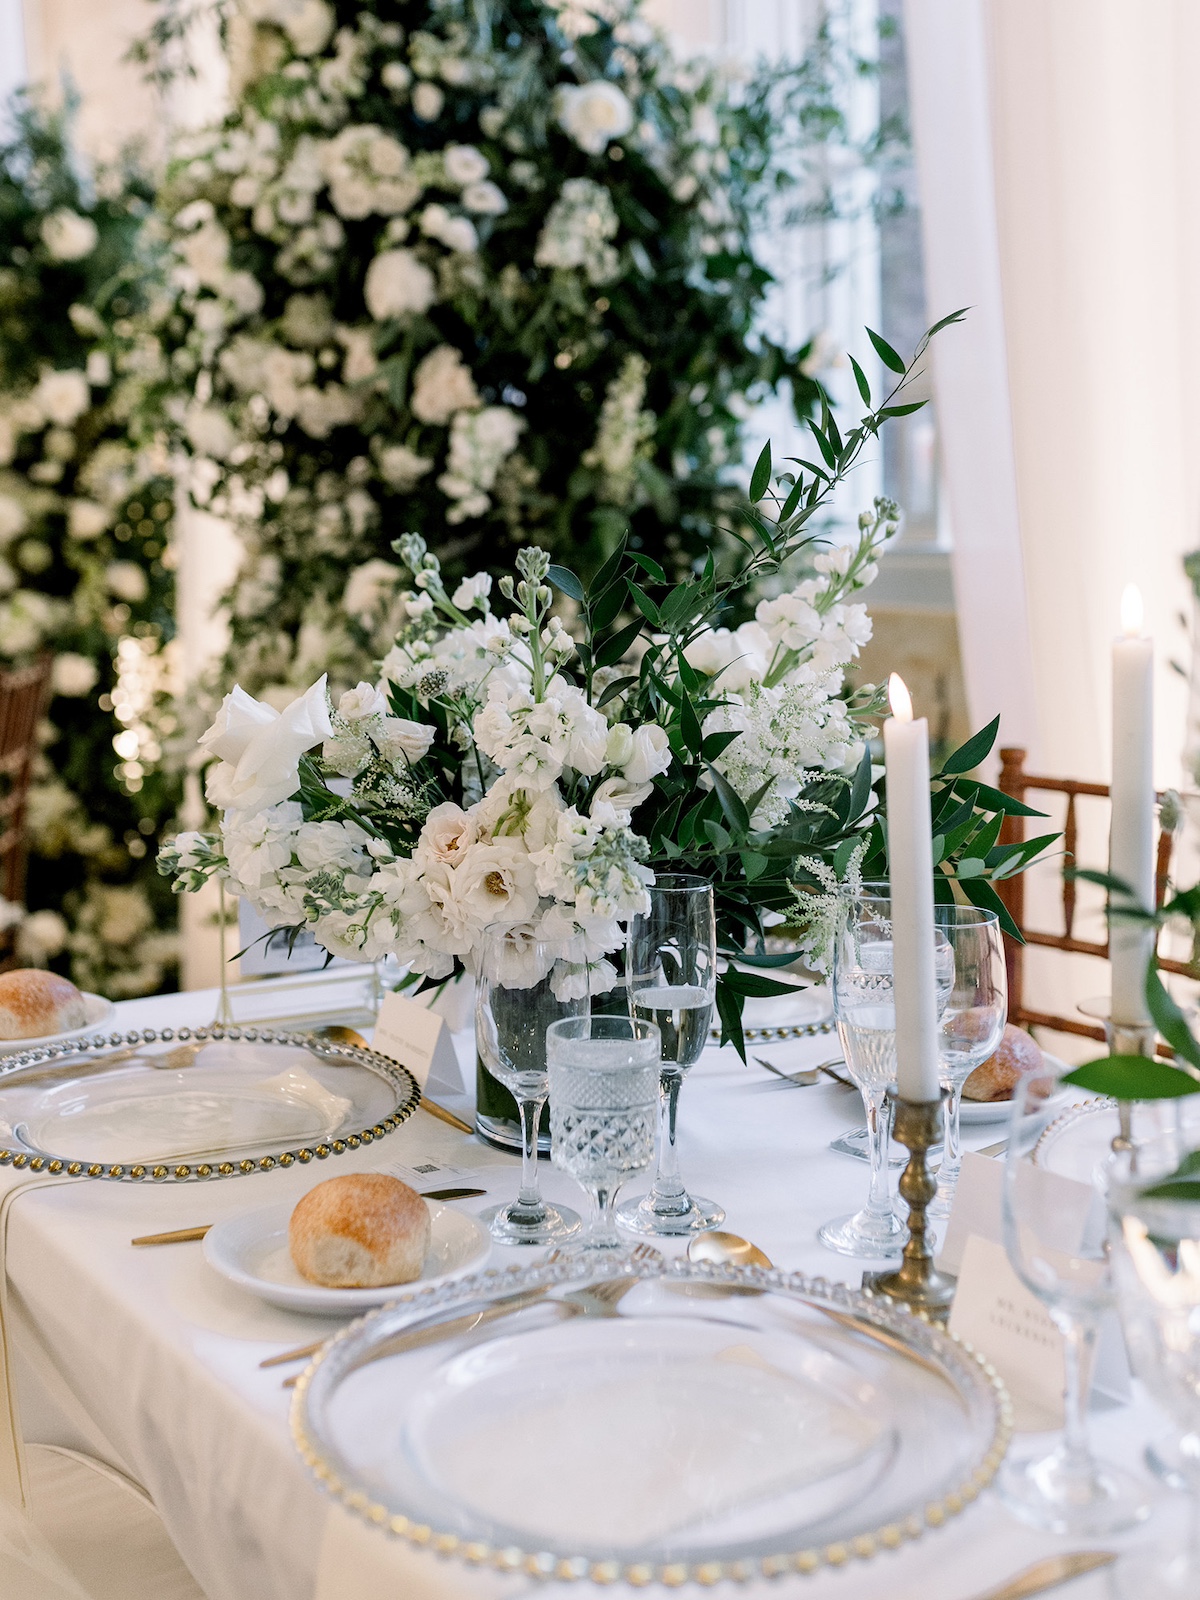 A stunning capture showcasing the elegance of the table setting, featuring refined decor elements that enhance the overall aesthetic.